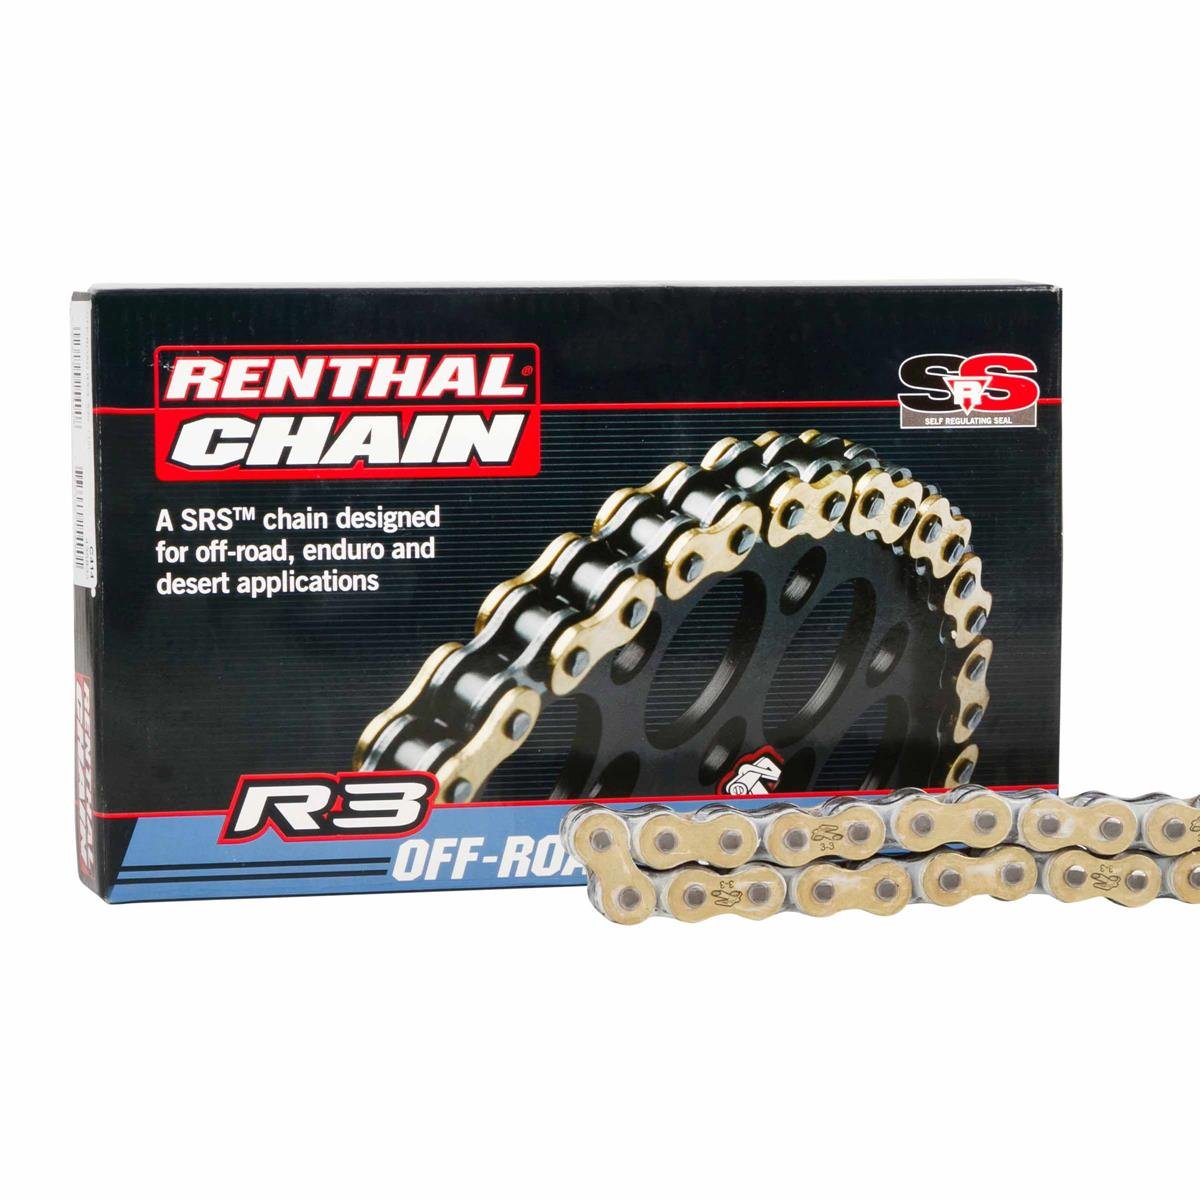 Renthal Catena R3 Gold 520 Passo